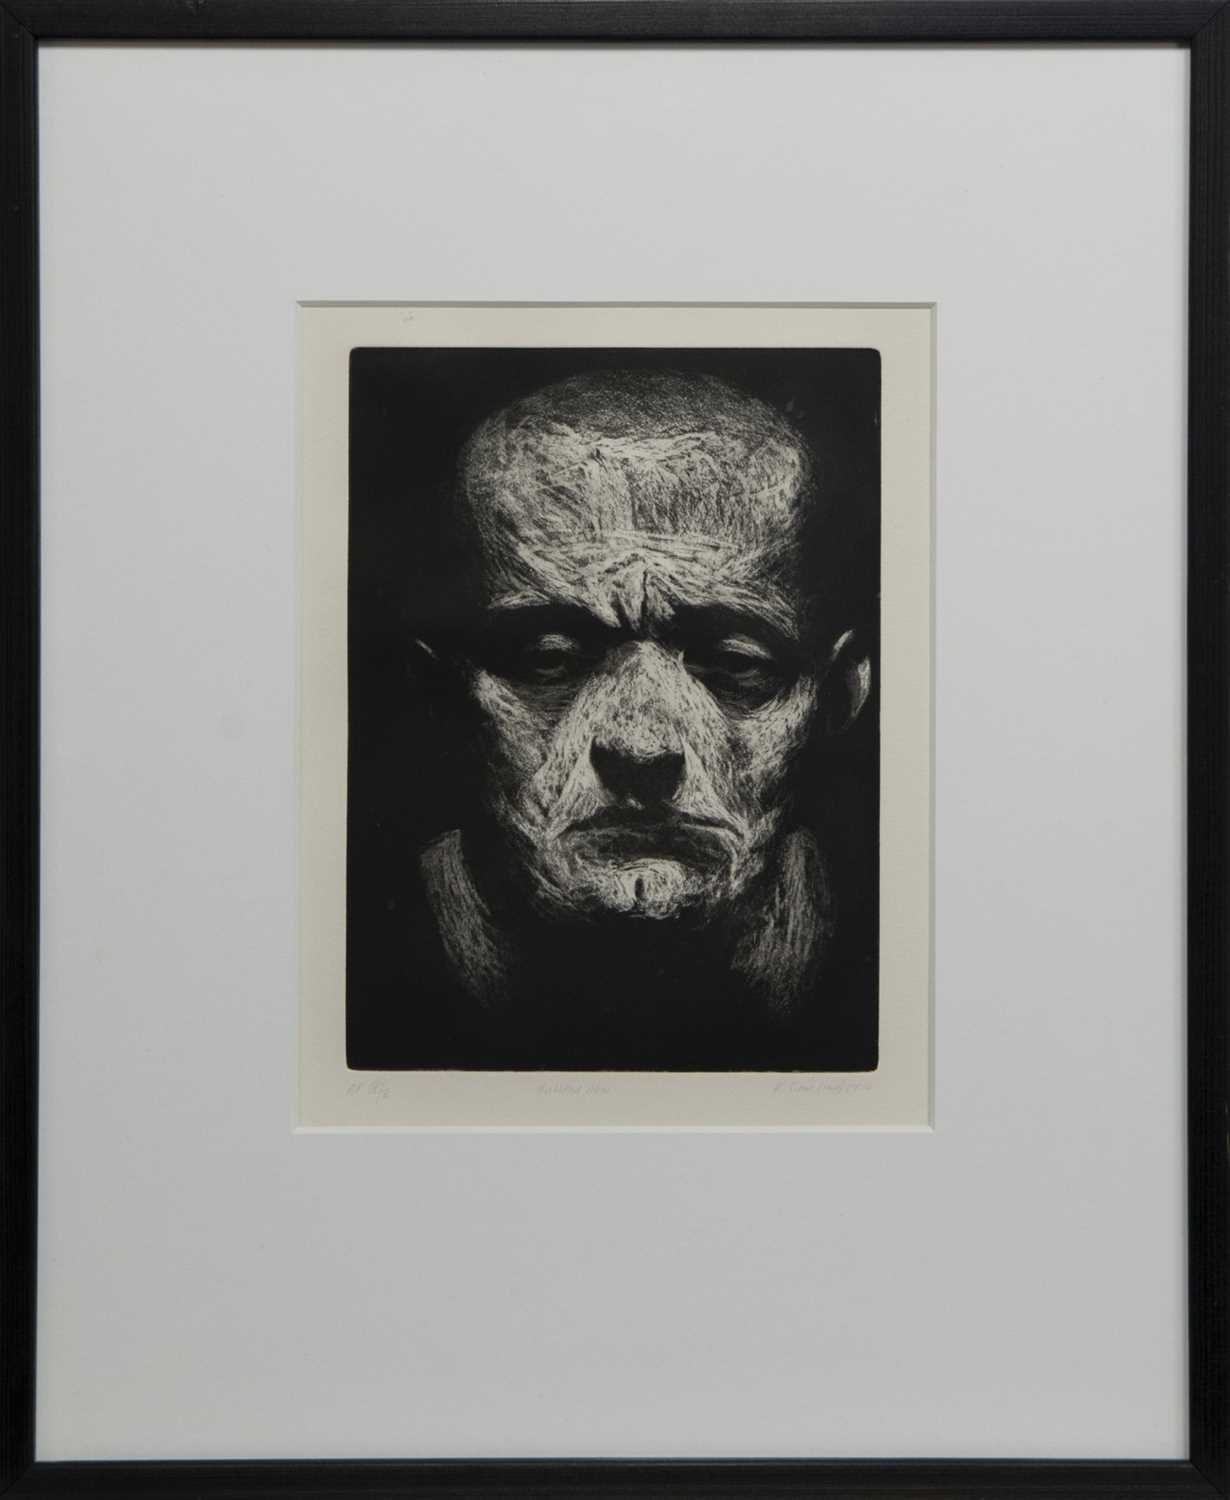 Lot 645 - UNTITLED MAN, AN ETCHING BY KEN CURRIE